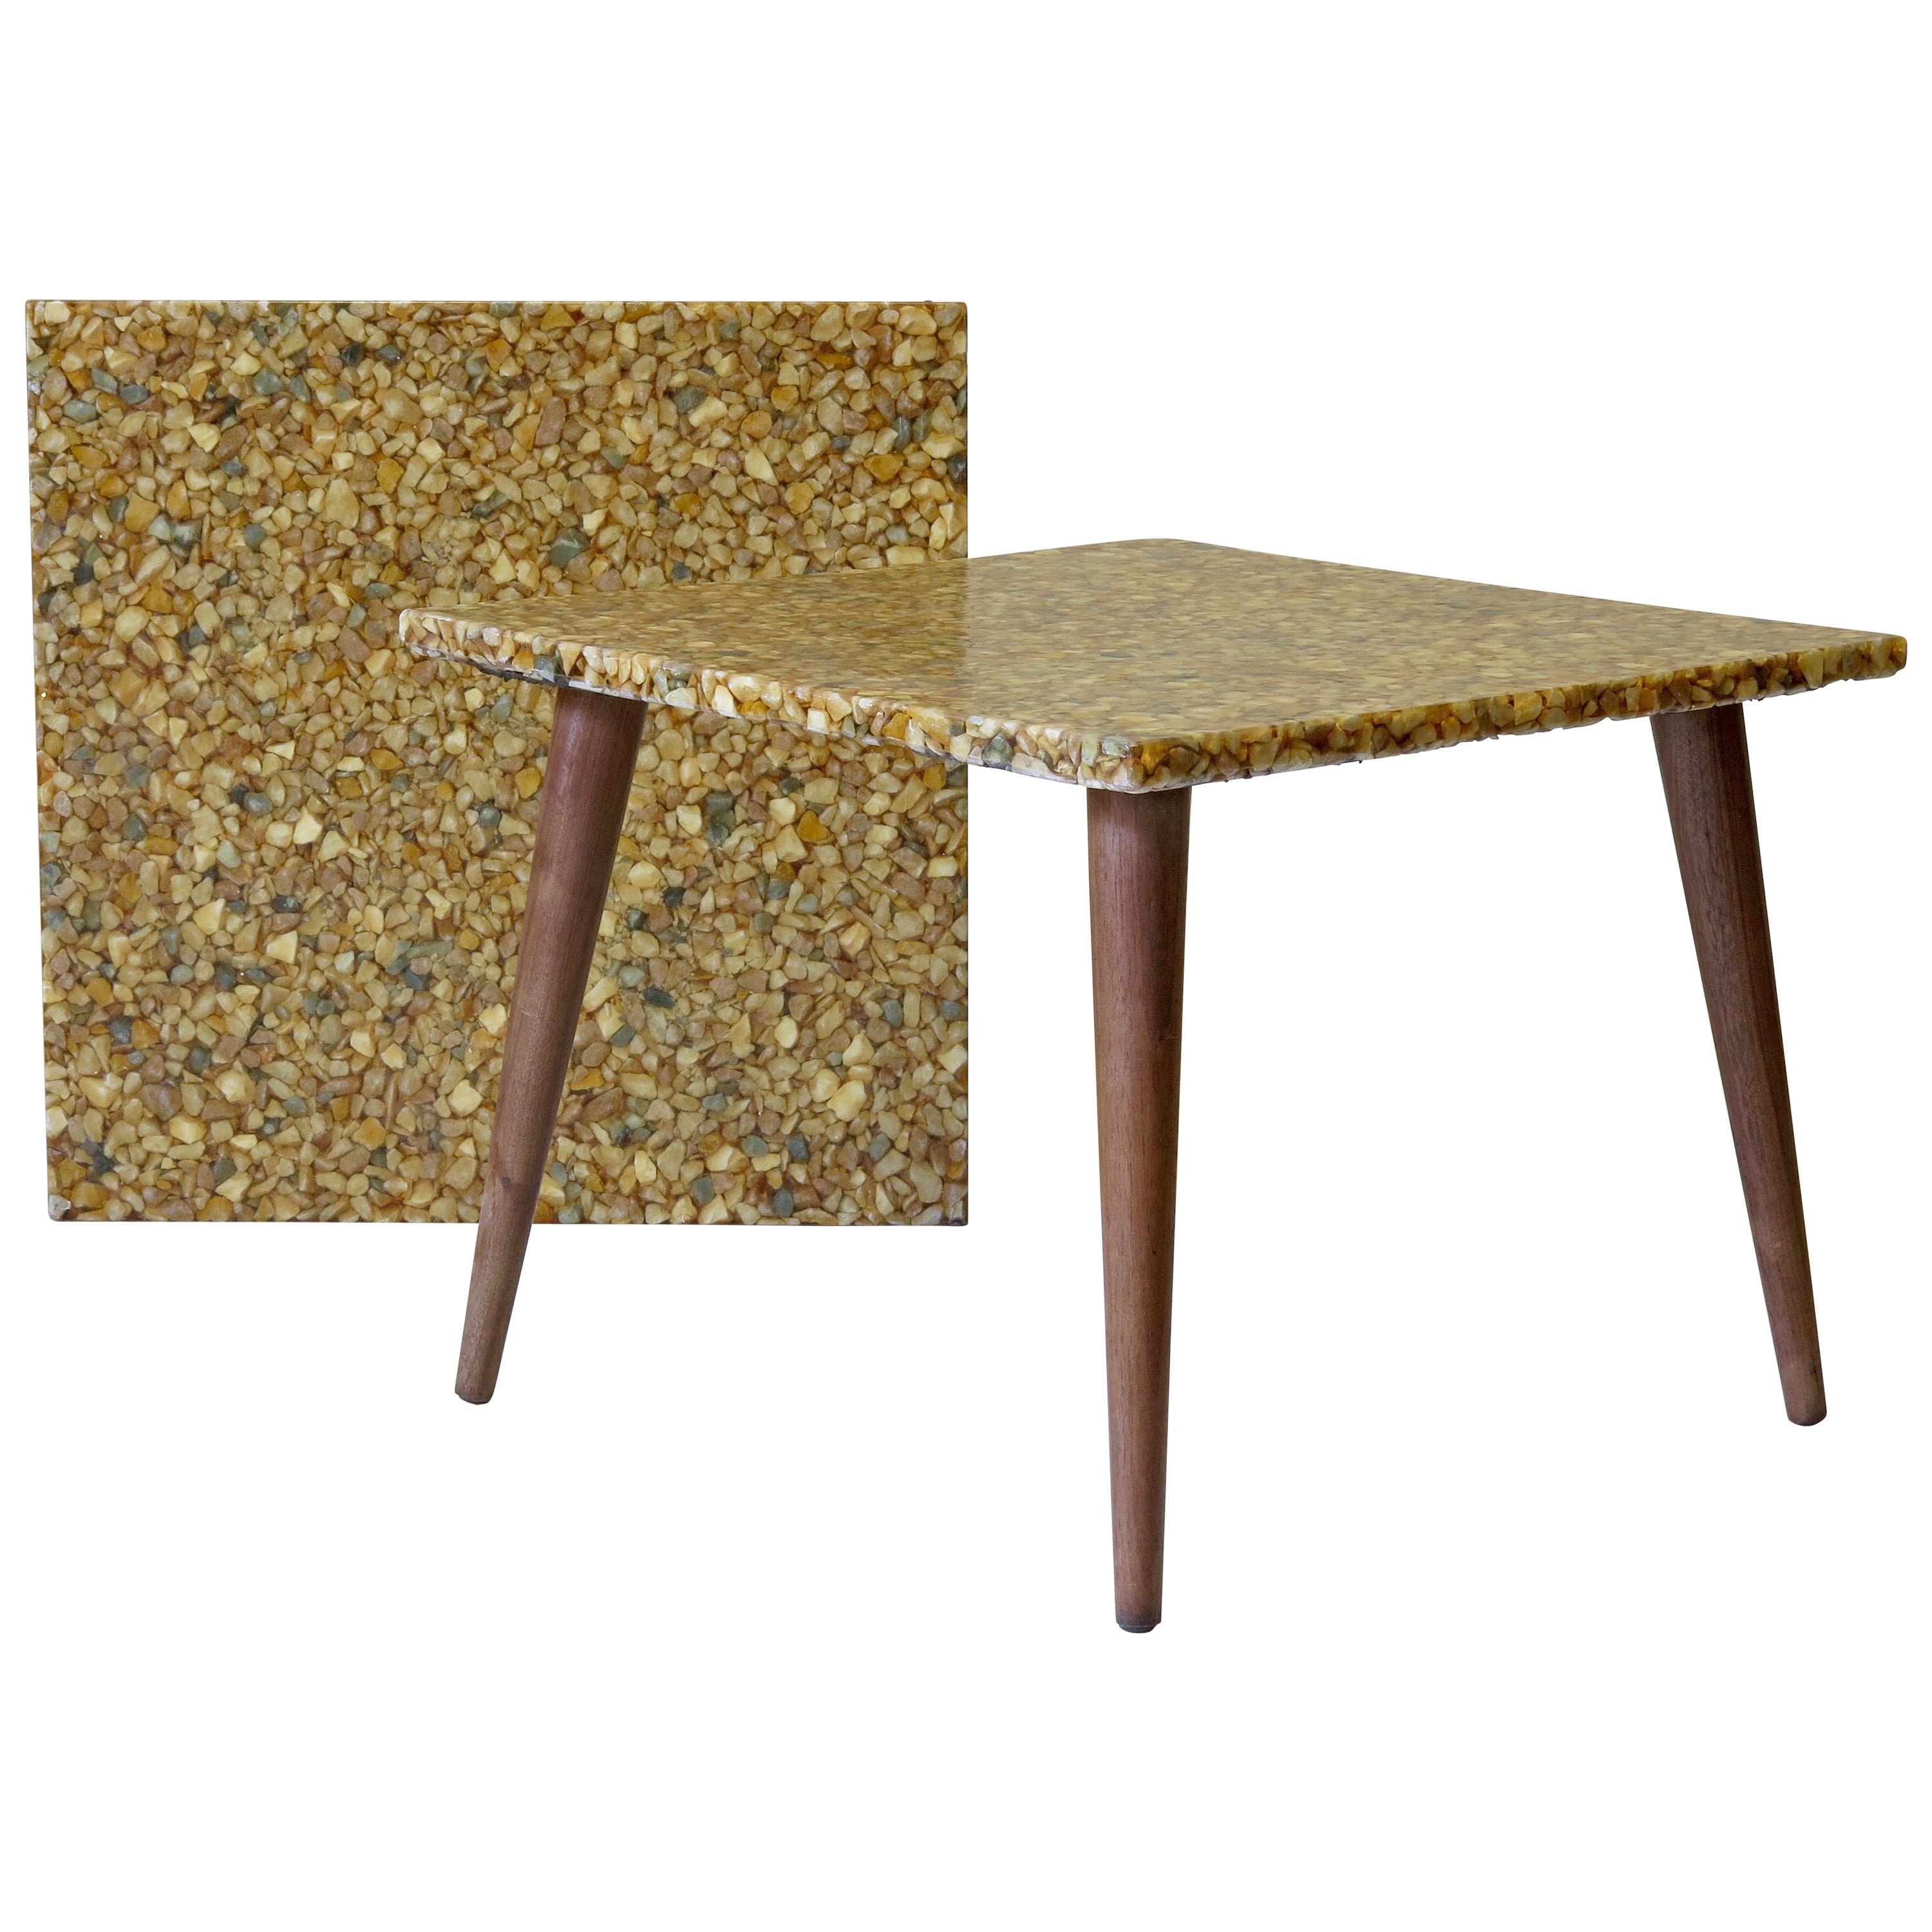 Pair of Mid-Century Resin & Pebble Top Side Tables